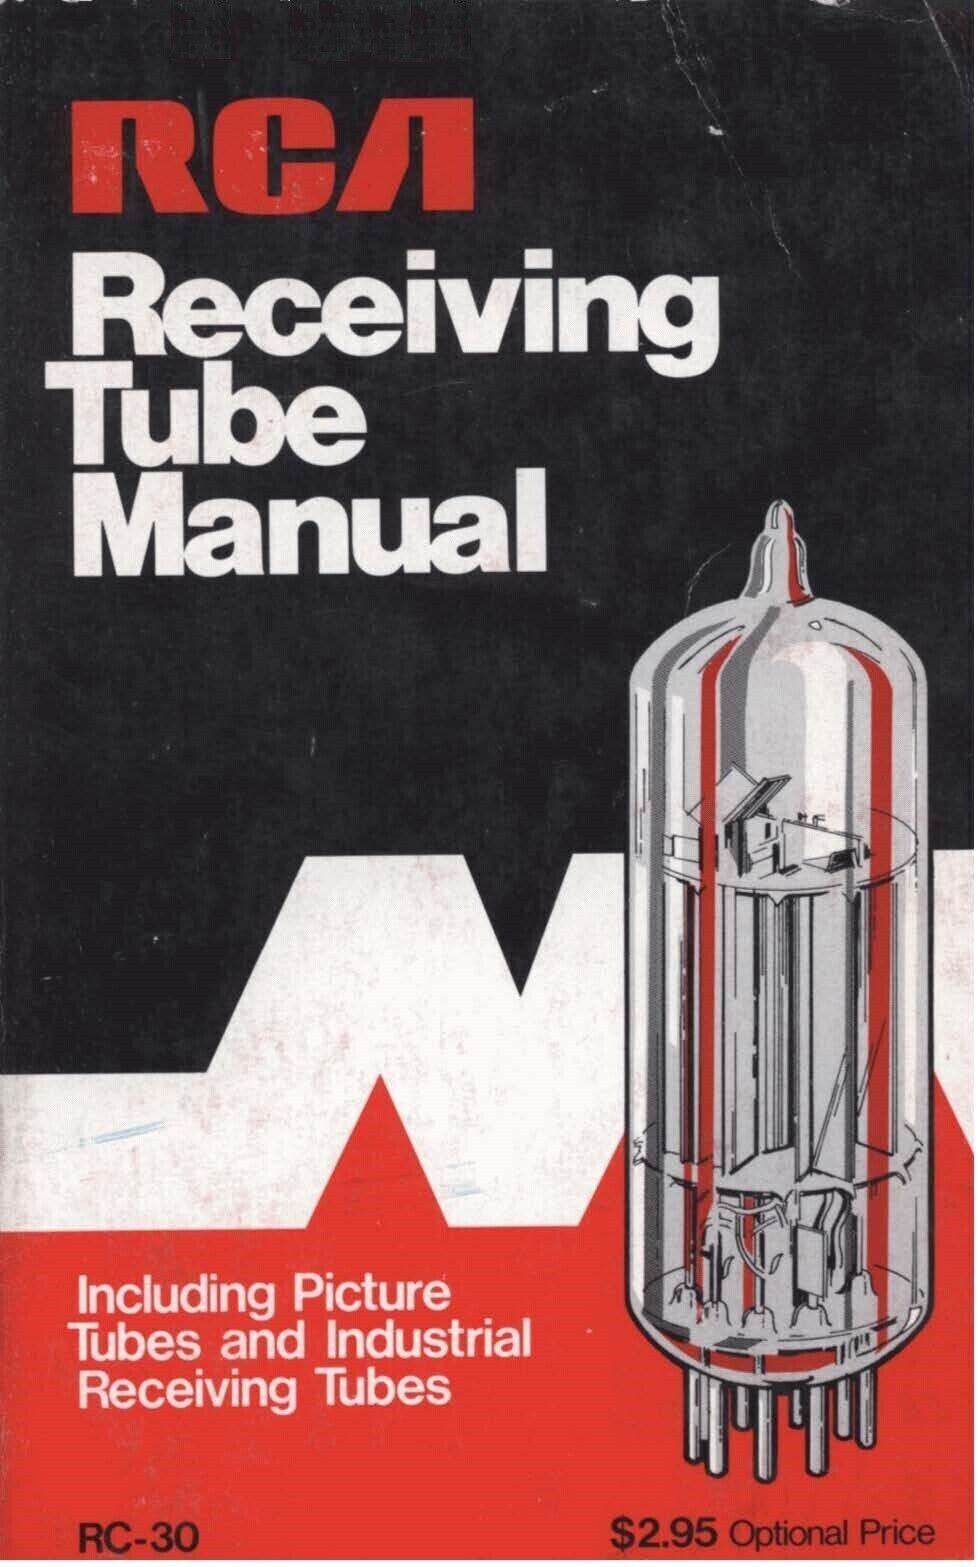 Receiving Tube Technical Manual Fits RCA Technical Series RC-30 - 1975